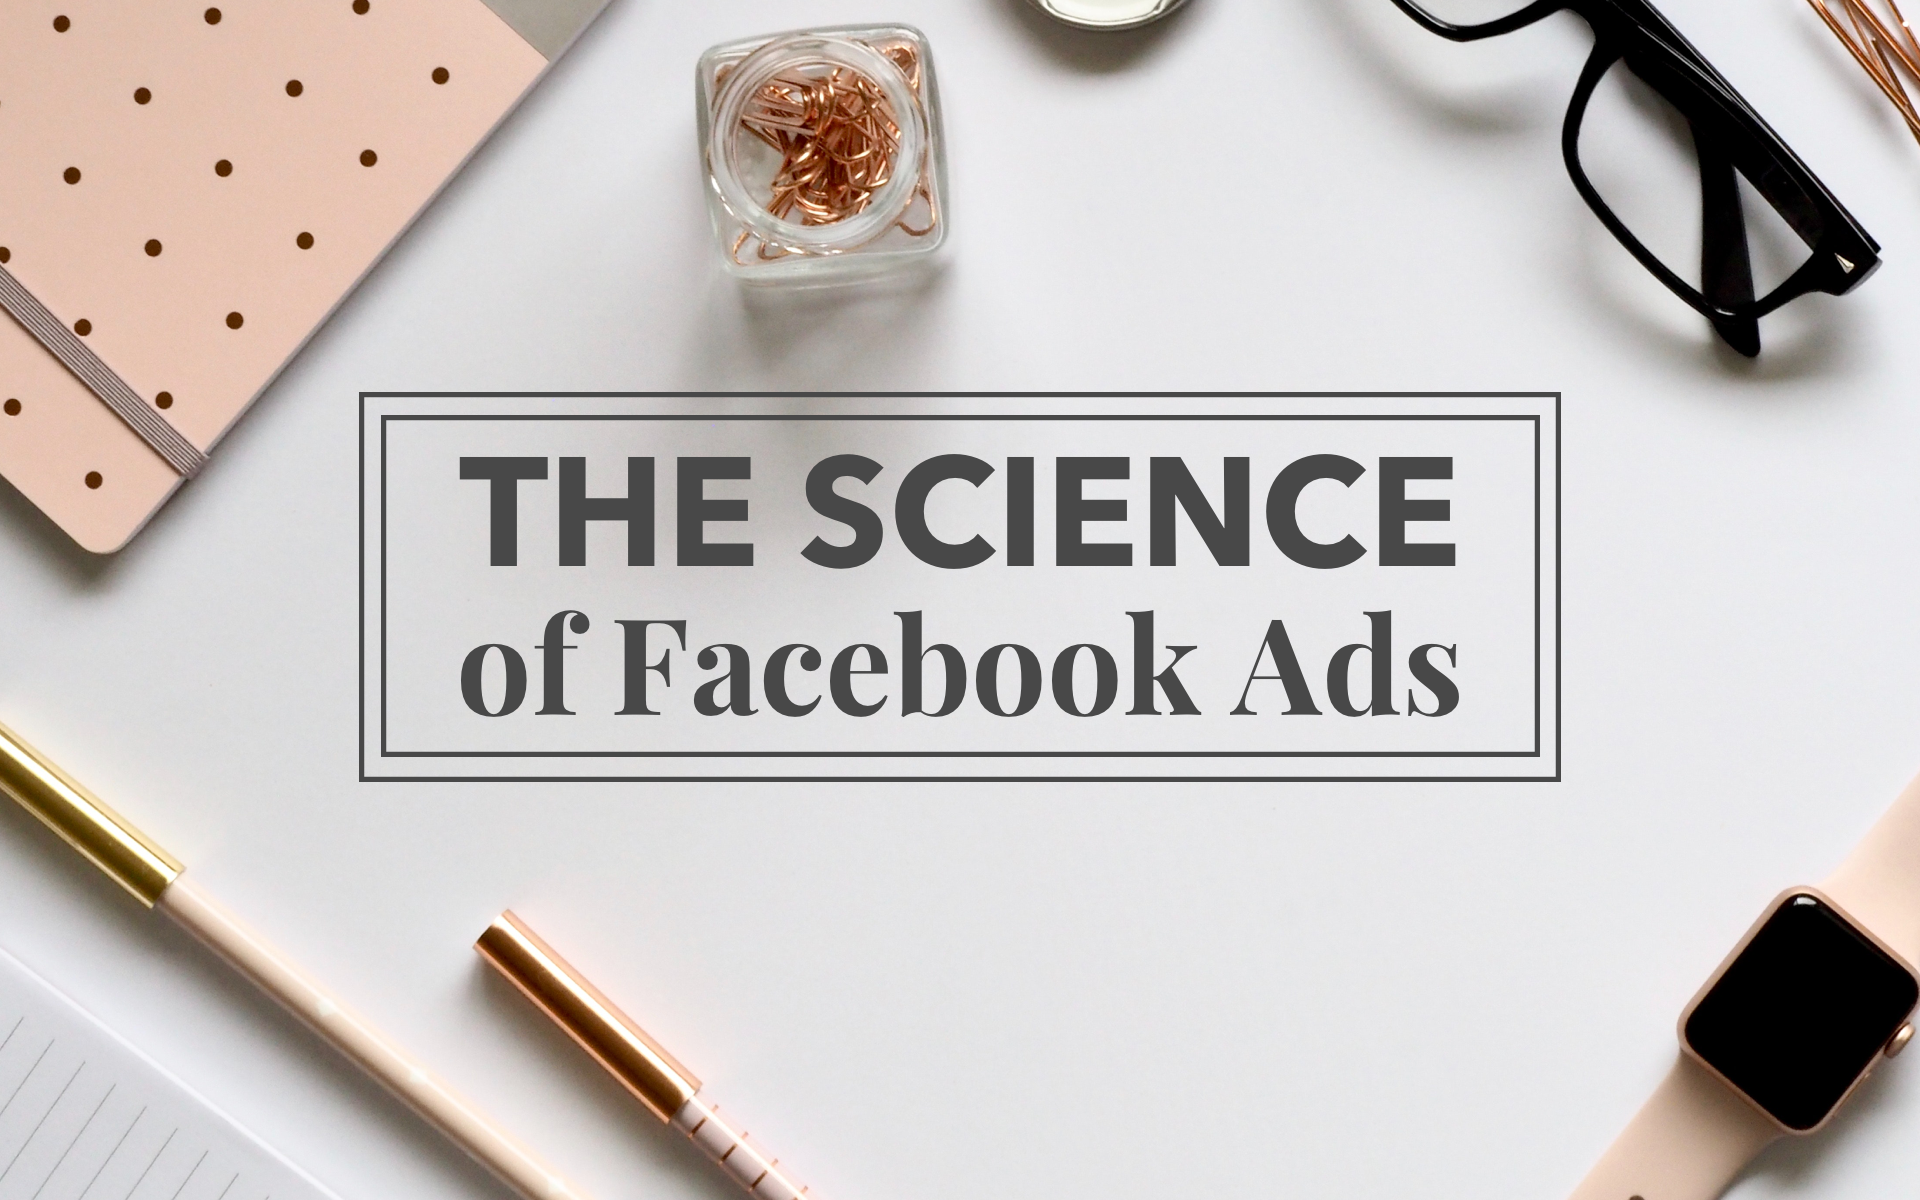 The Science of Facebook Ads